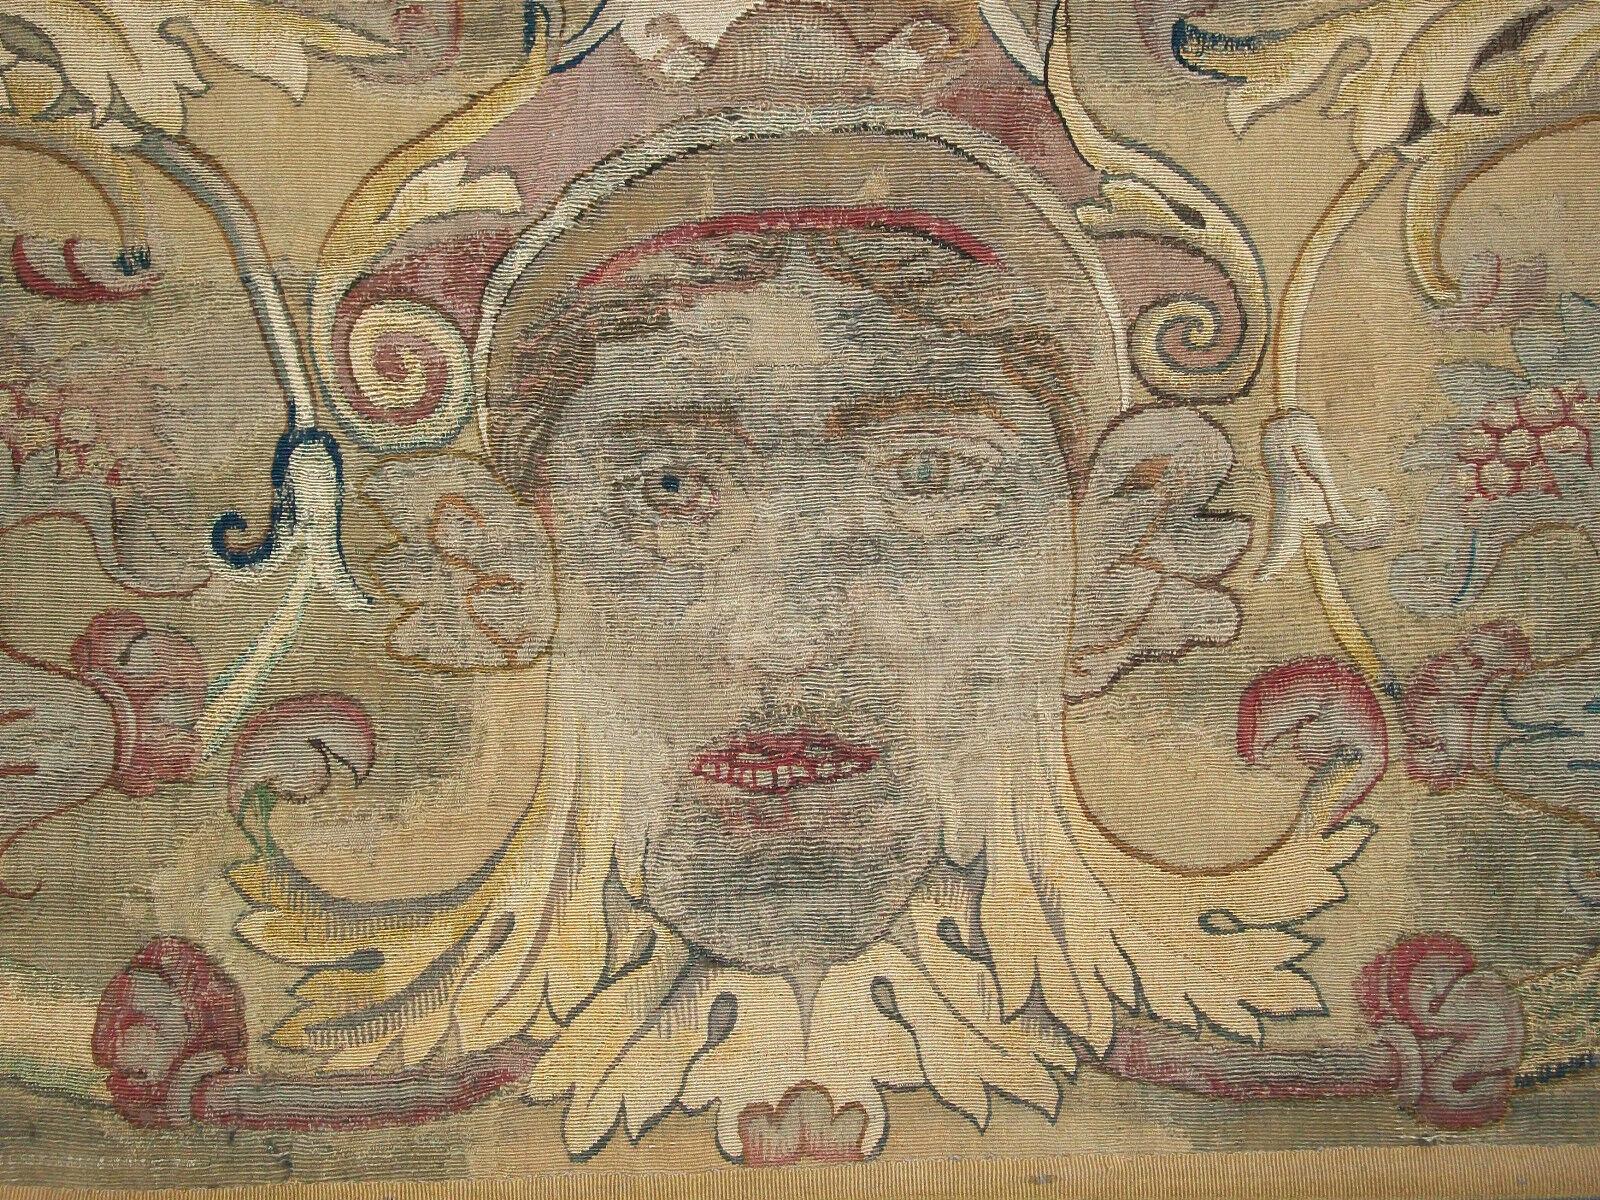 PERINO DEL VAGA 'After', Important Flemish Grotesque Tapestry, Circa 1550 For Sale 2